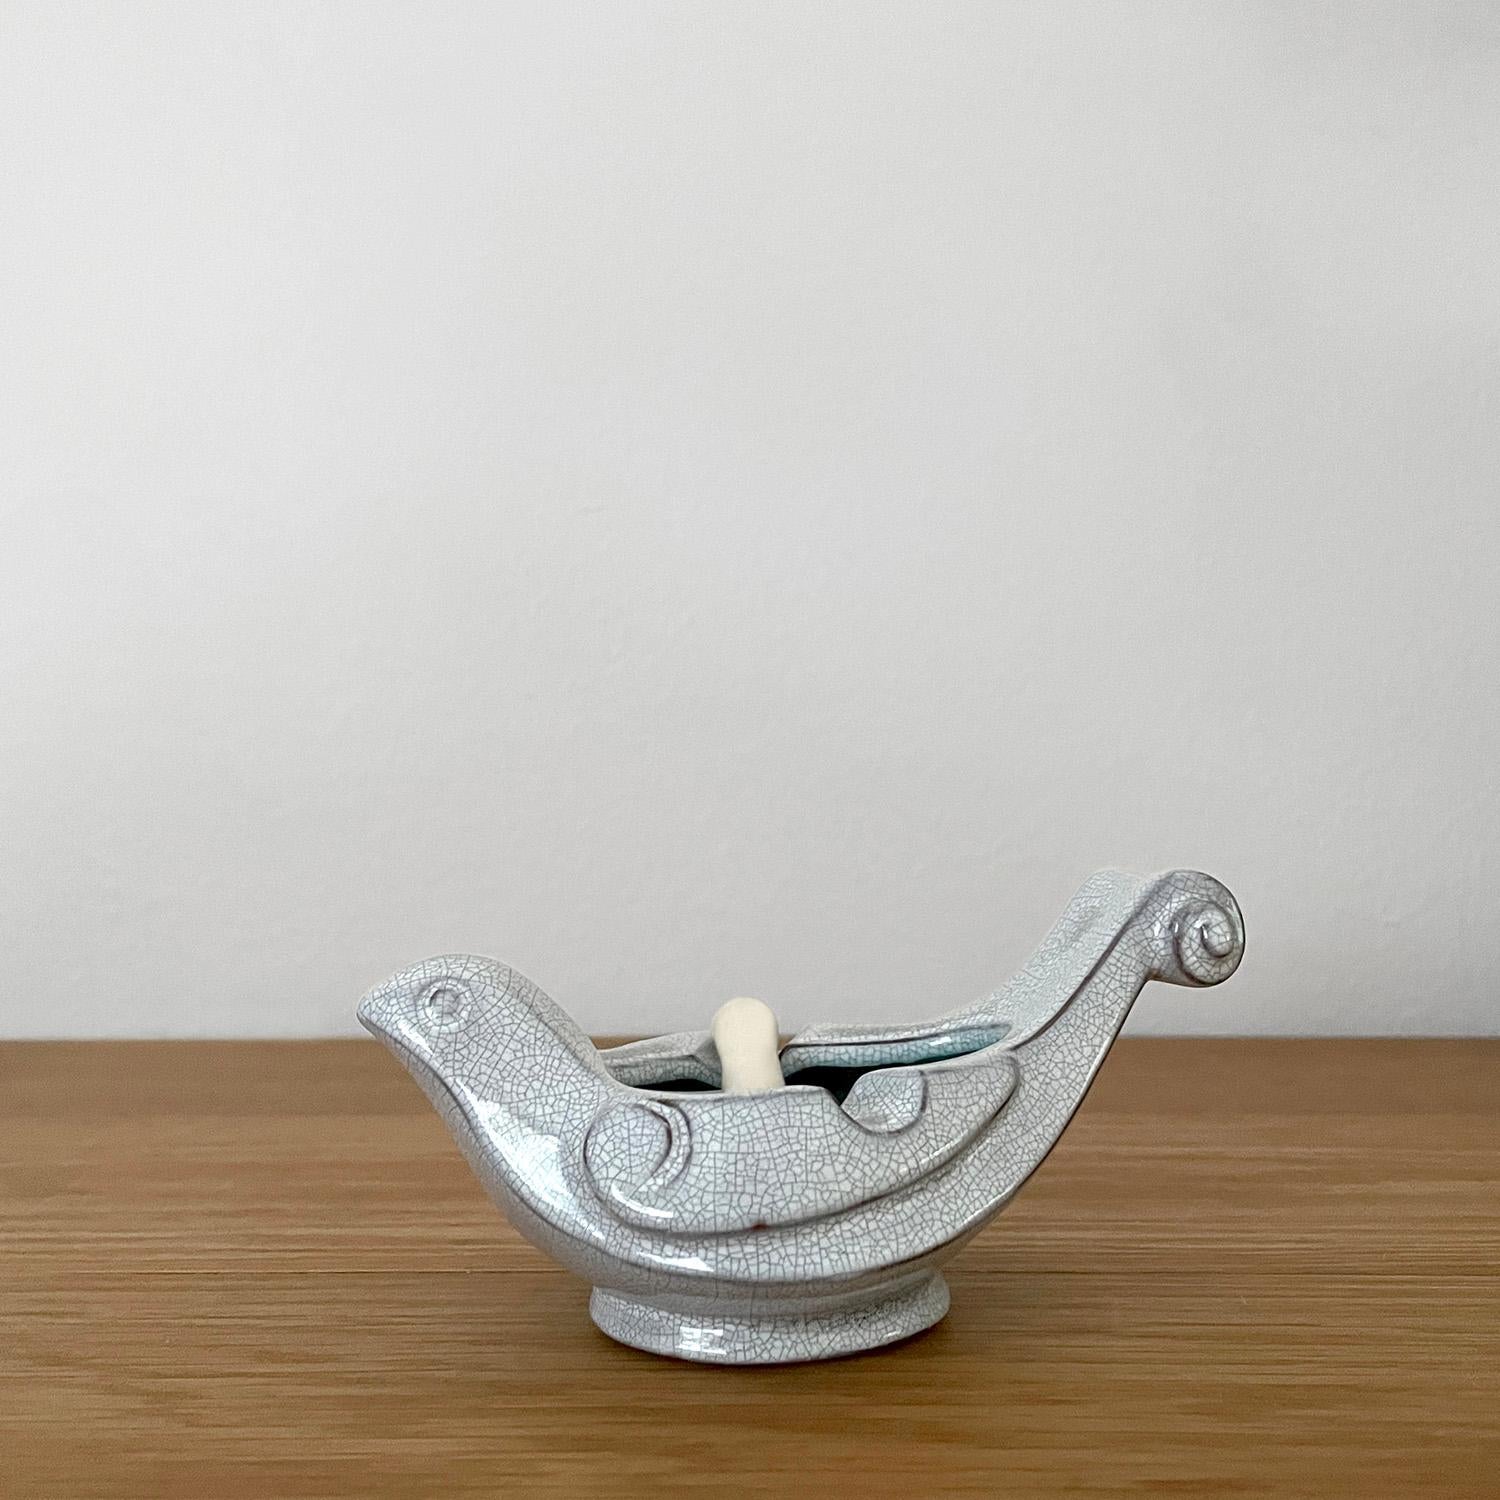 

French crackle ceramic dove mortar & pestle
France, circa 1940s 
This petite mortar & pestle set is both delicate and darling 
Beautifully sculpted bird mortar has wonderful veining detail throughout 
Interior and exterior of the vessel have